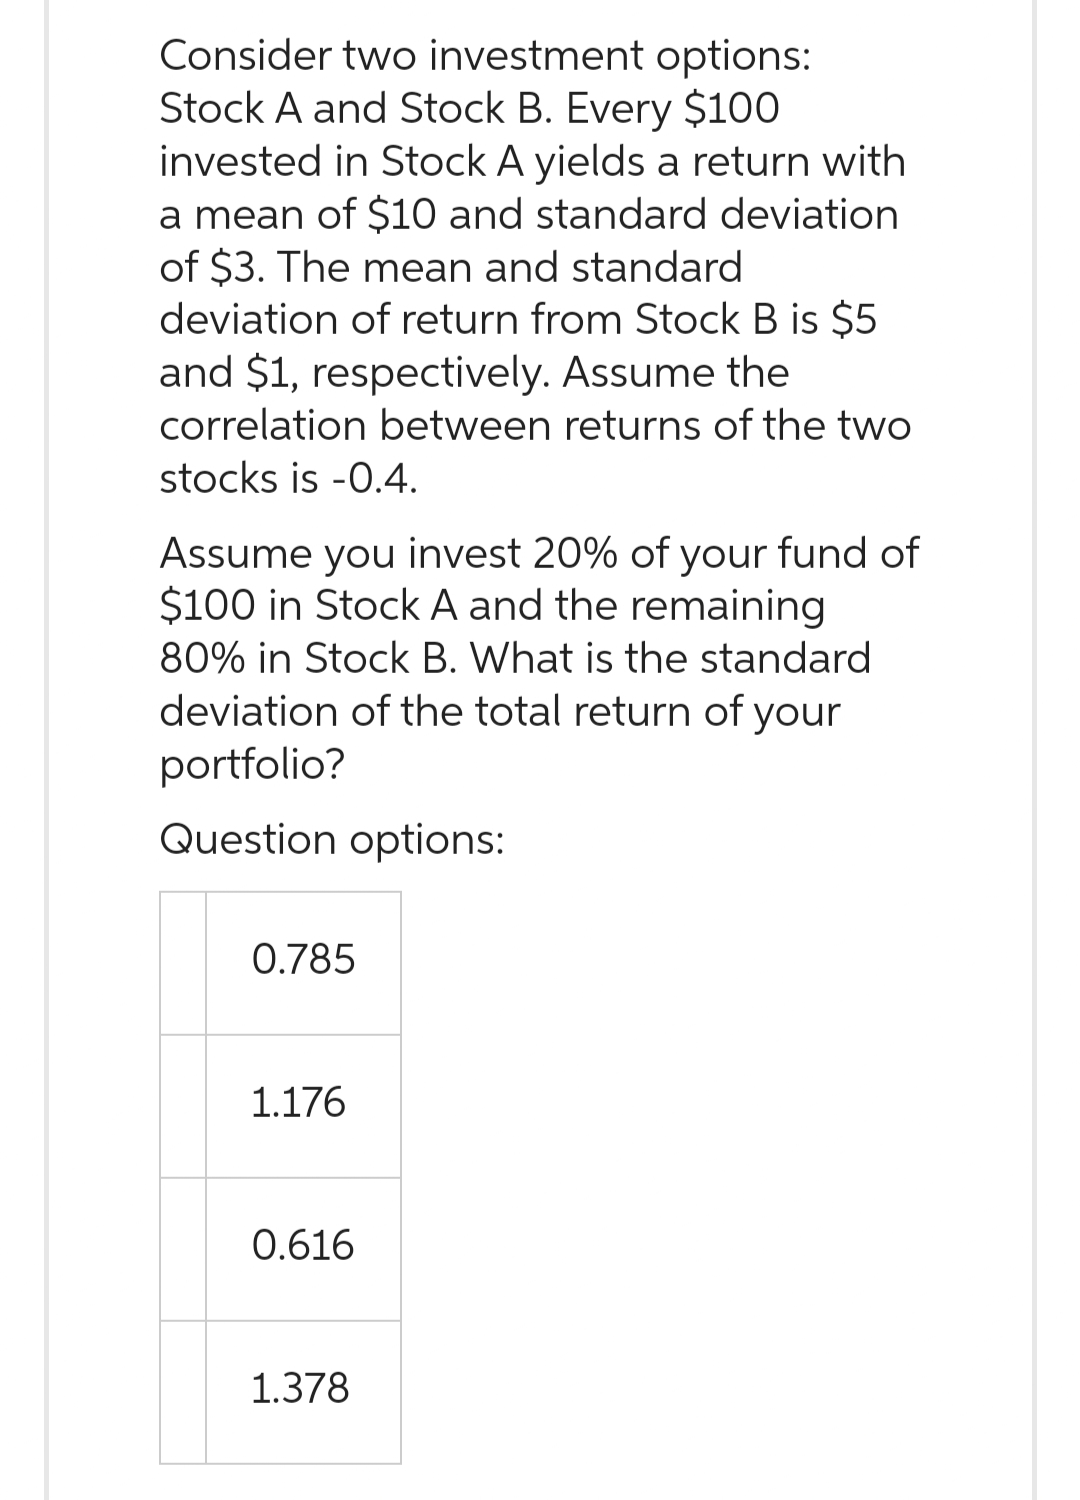 Consider two investment options:
Stock A and Stock B. Every $100
invested in Stock A yields a return with
a mean of $10 and standard deviation
of $3. The mean and standard
deviation of return from Stock B is $5
and $1, respectively. Assume the
correlation between returns of the two
stocks is -0.4.
Assume you invest 20% of your fund of
$100 in Stock A and the remaining
80% in Stock B. What is the standard
deviation of the total return of your
portfolio?
Question options:
0.785
1.176
0.616
1.378